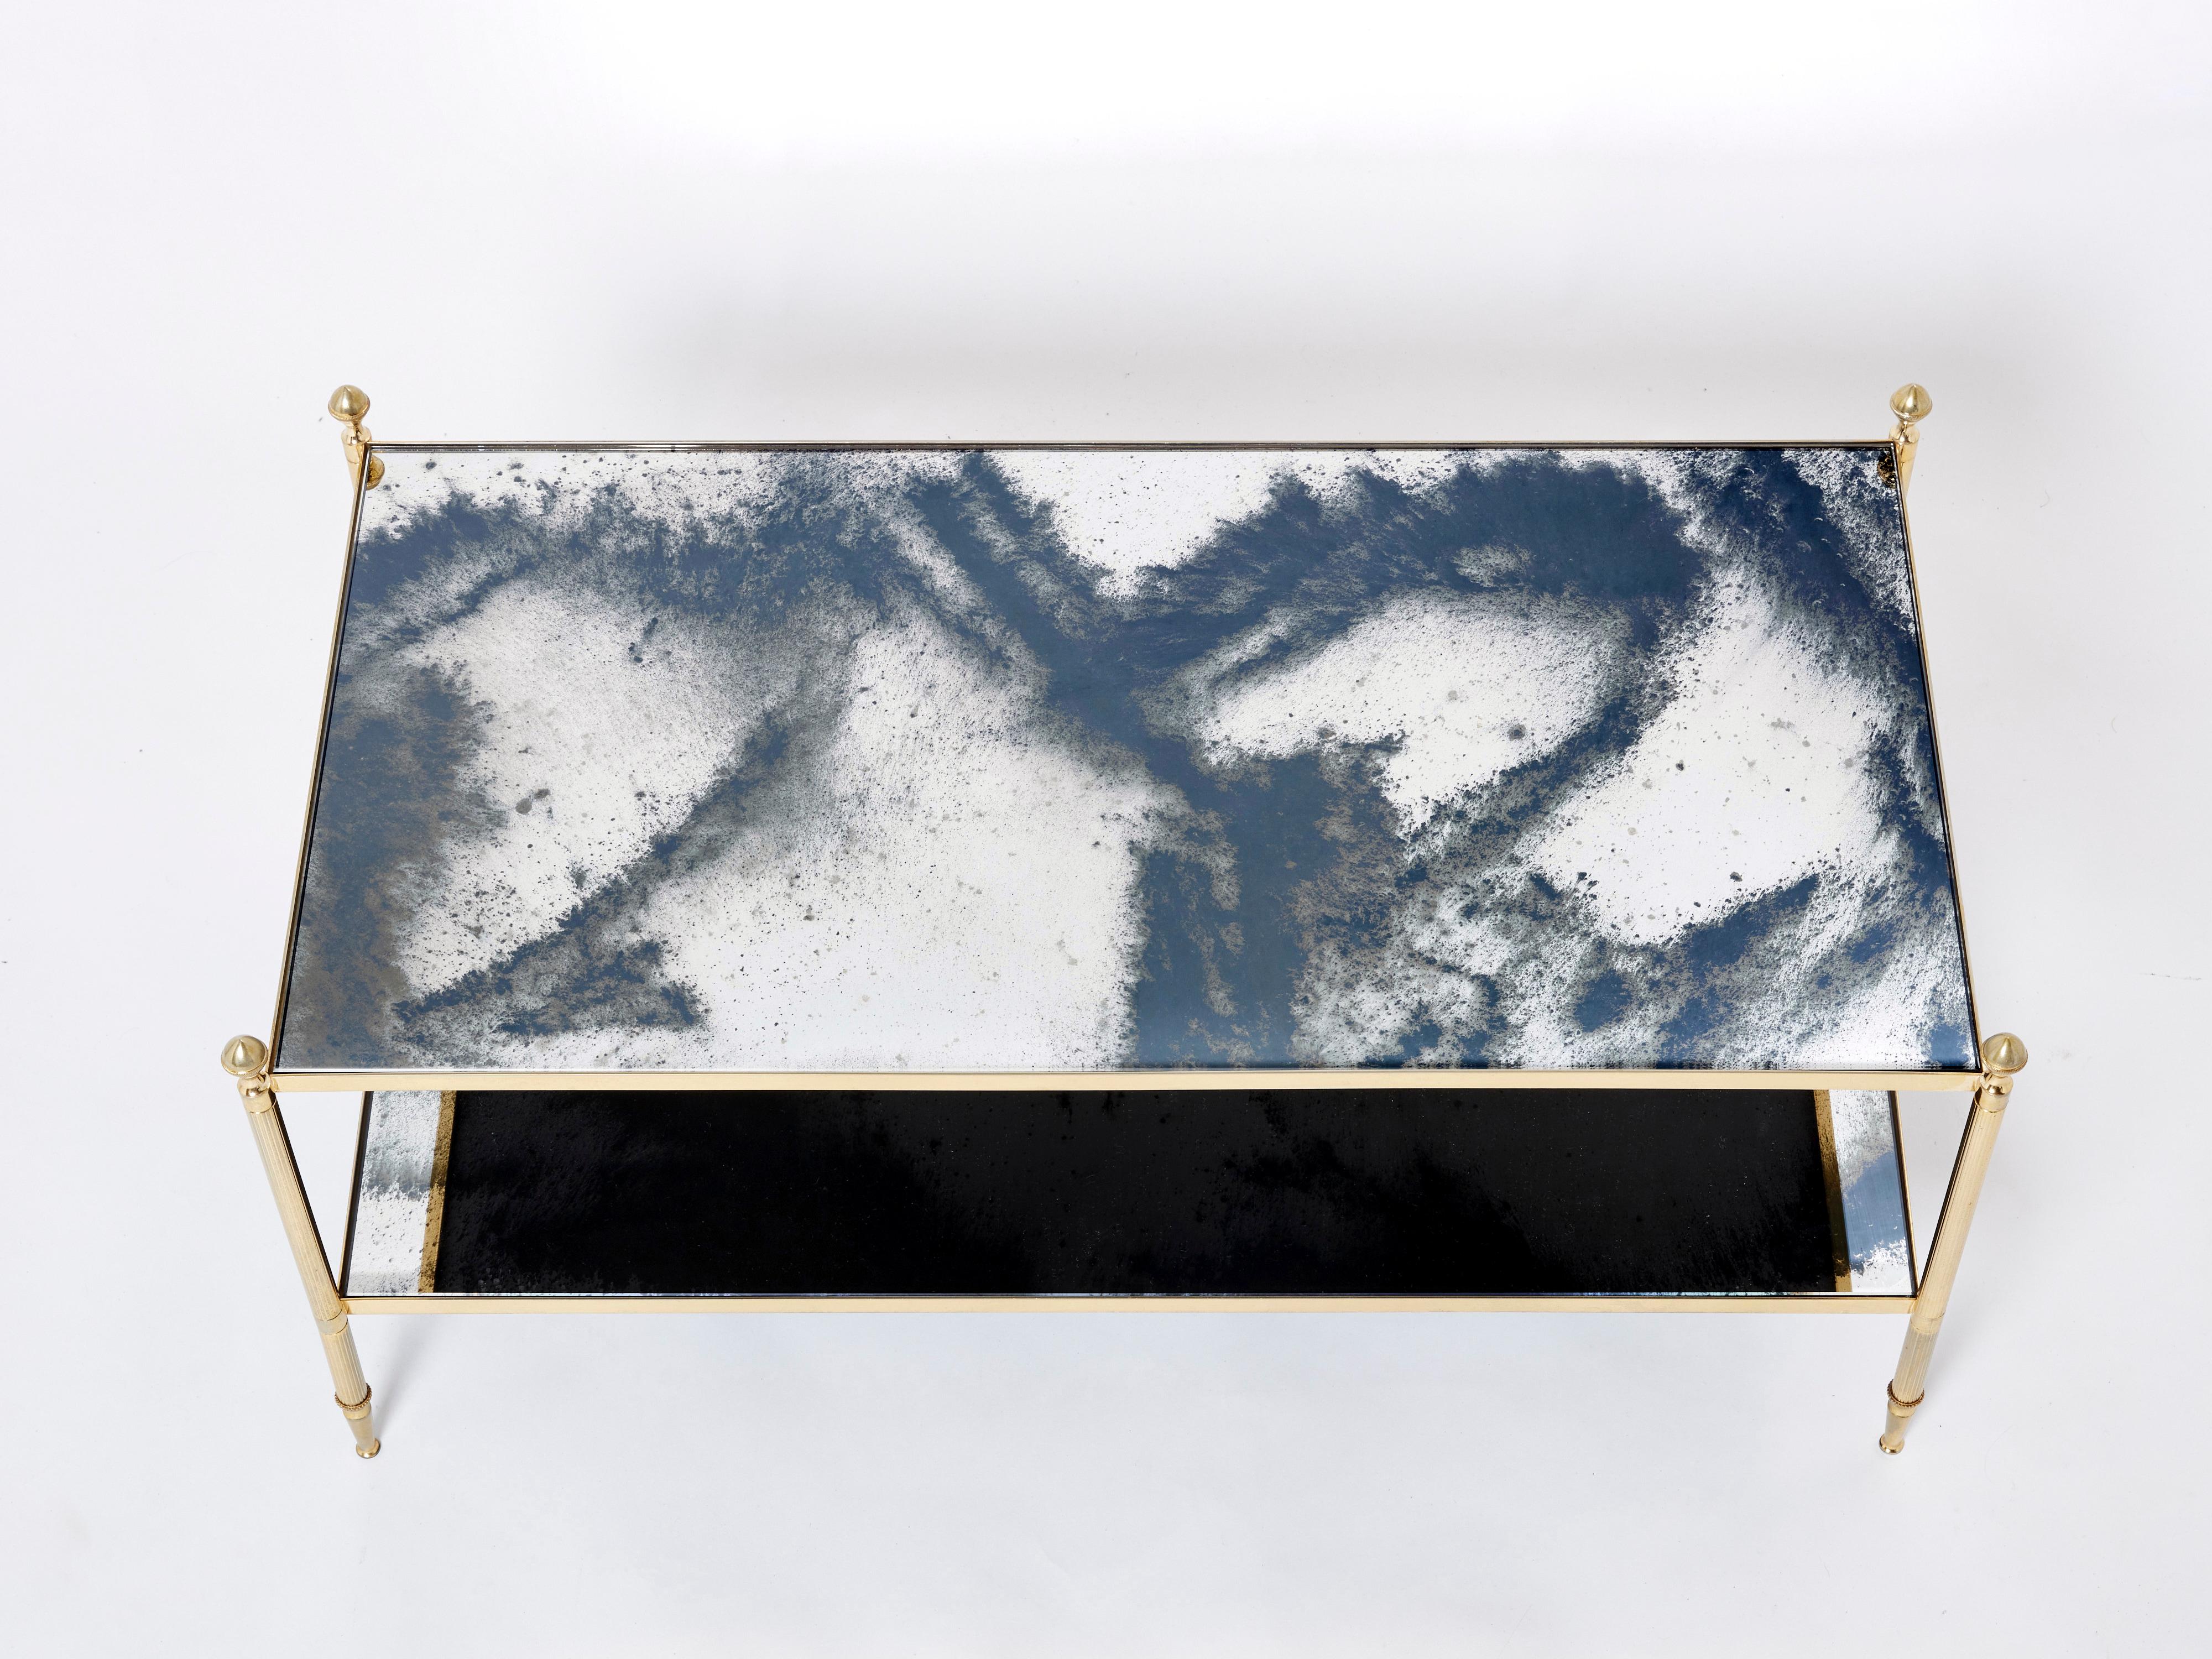 Maison Jansen Brass Chrome Mirrored Two-Tier Coffee Table 1970s For Sale 4